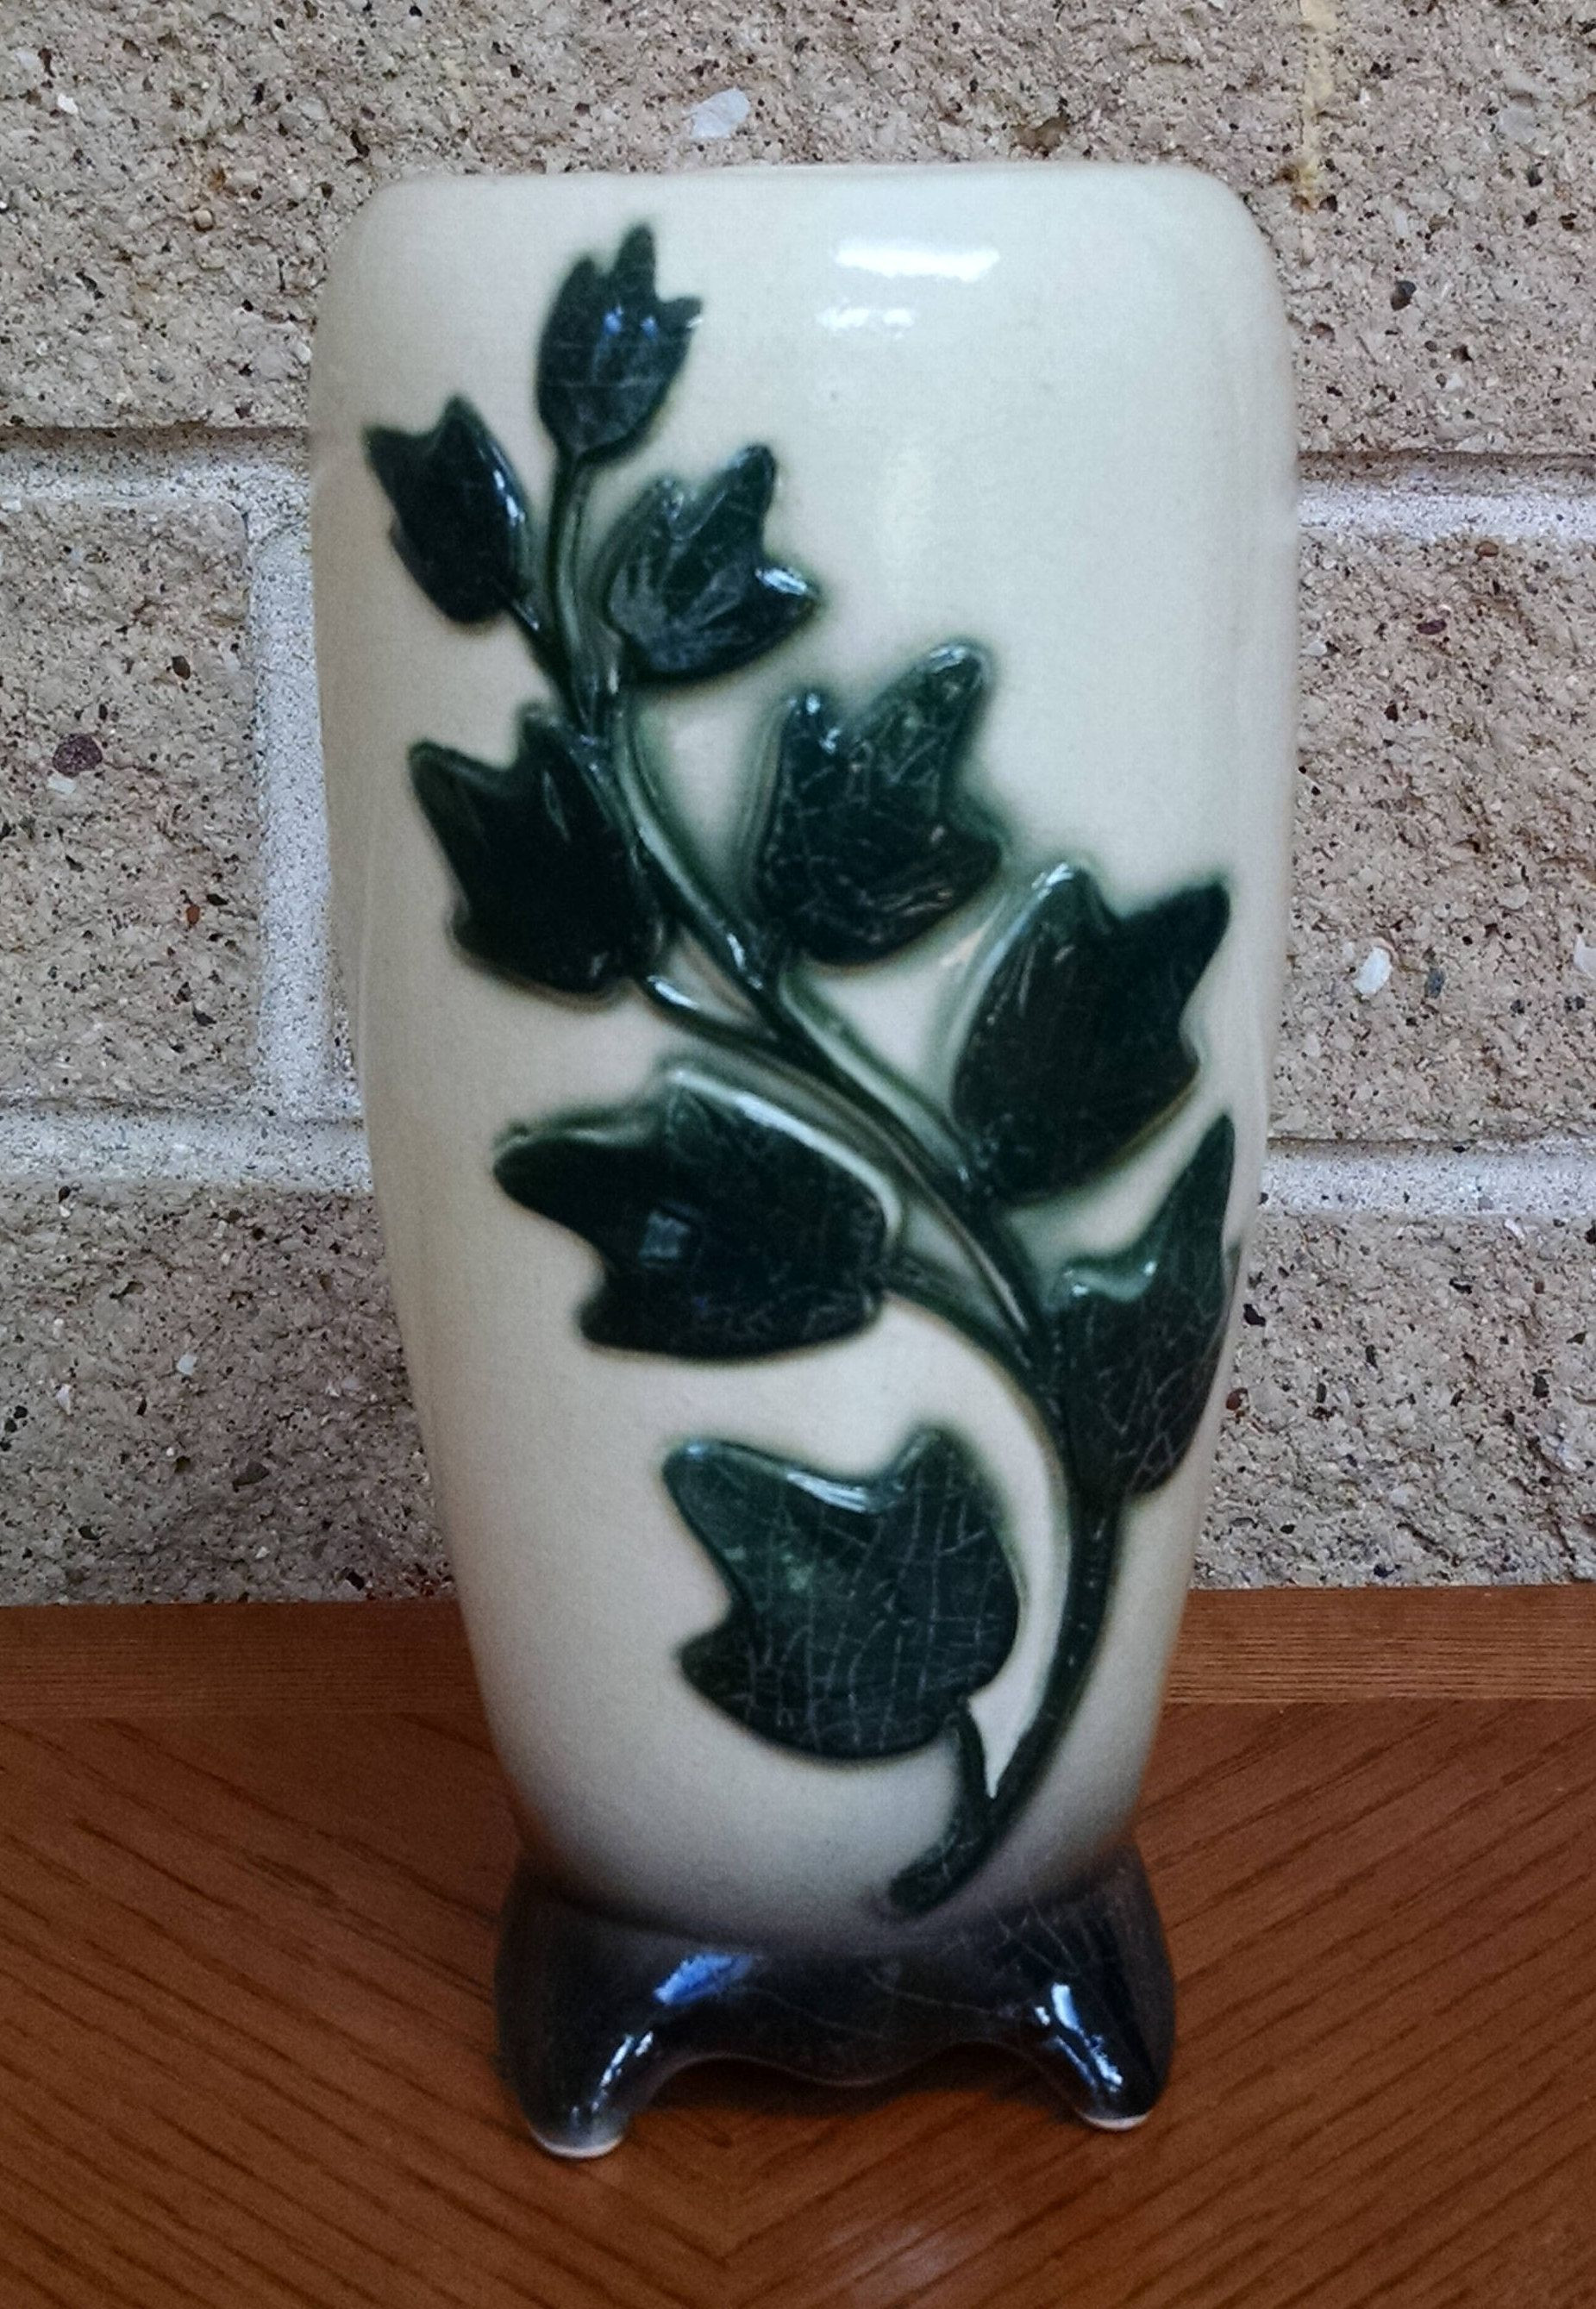 25 Fashionable Large Roseville Vase 2022 free download large roseville vase of art pottery by becca studio pottery green bowl ebay collectibles with regard to royal copley ivy vase cream and green with black base vintage pottery vase spaulding c